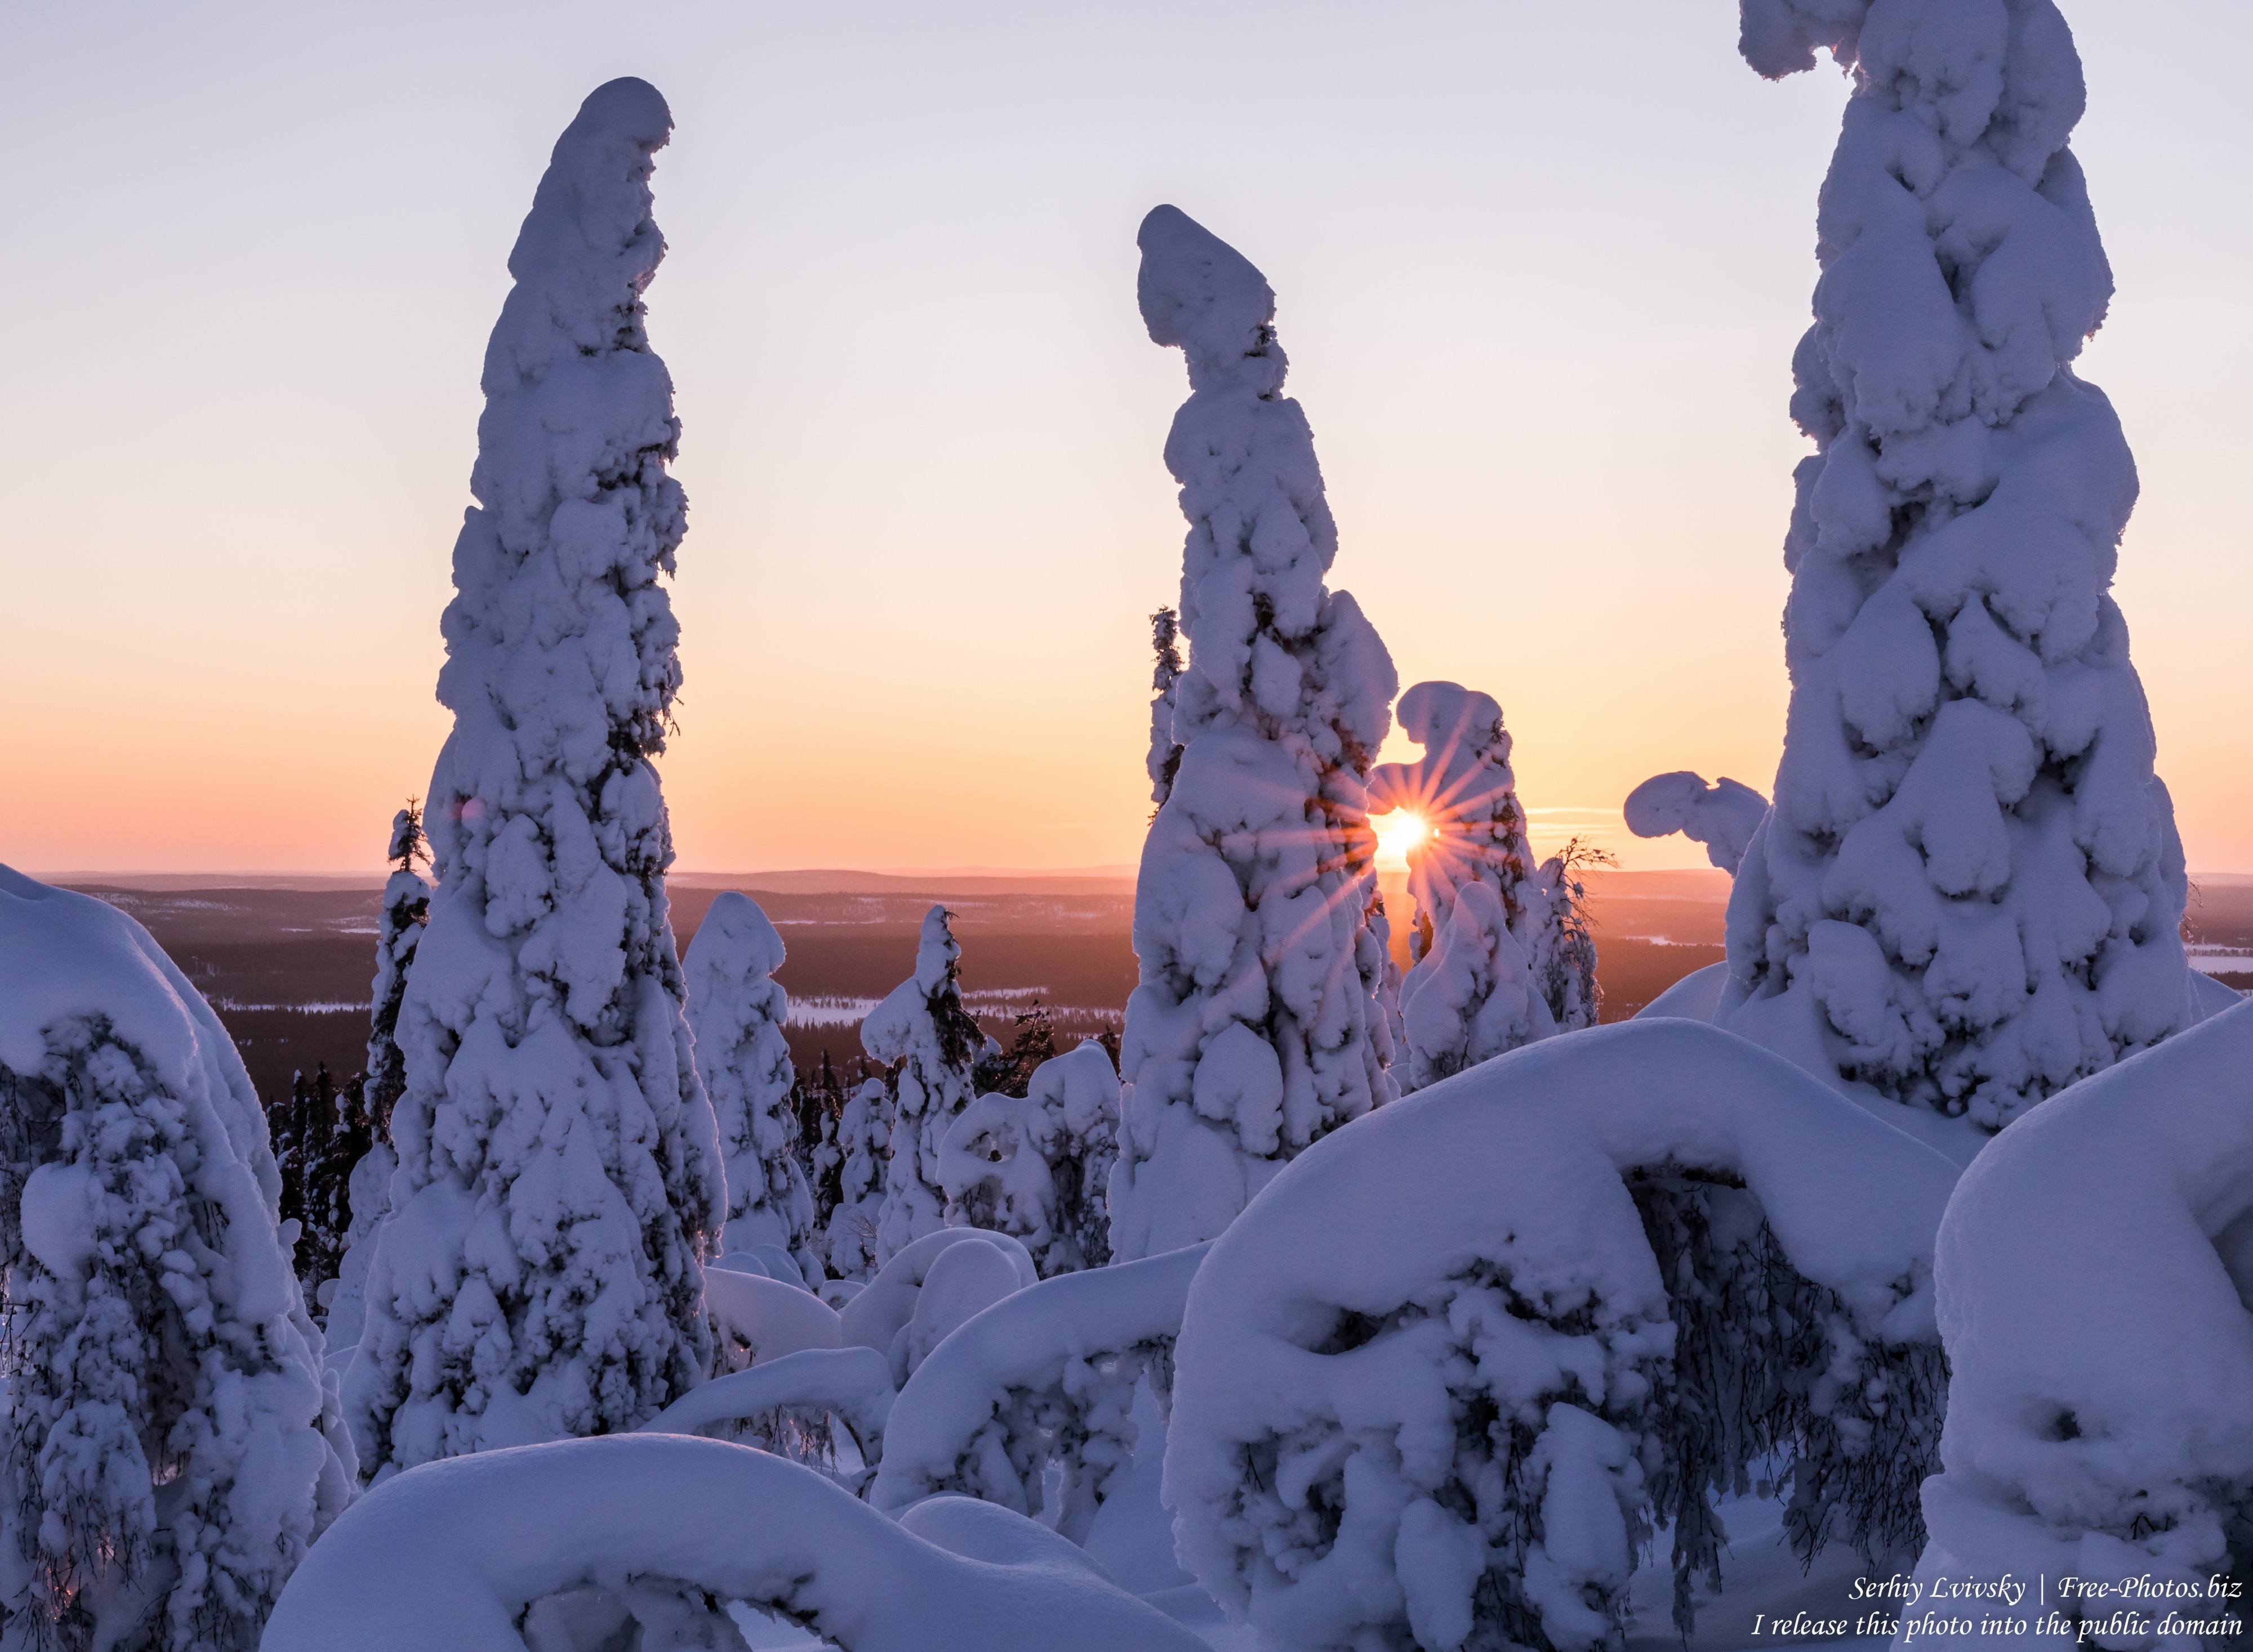 Valtavaara, Finland, photographed in January 2020 by Serhiy Lvivsky, picture 13